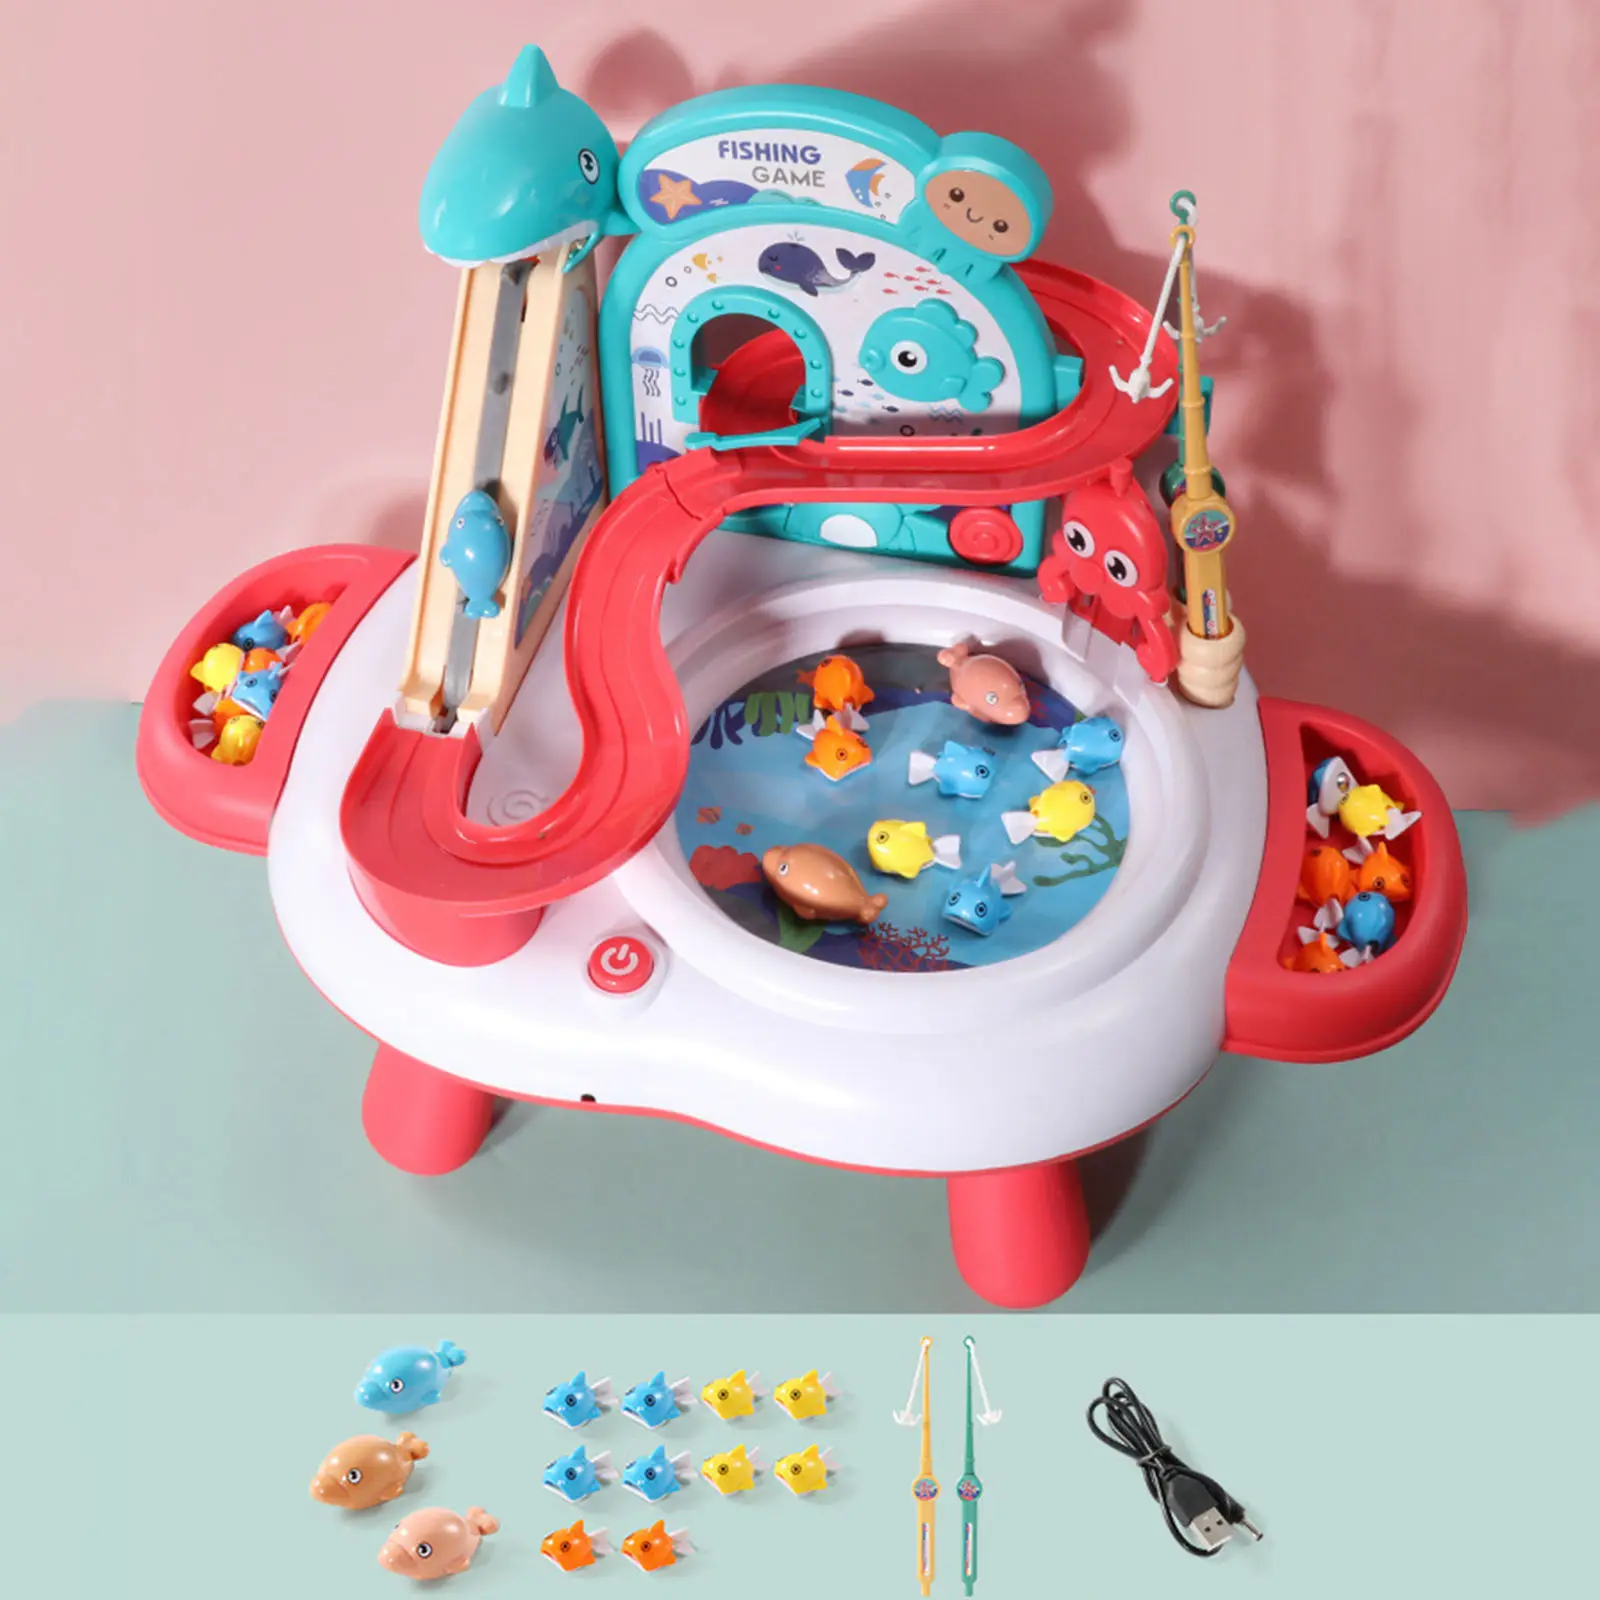 Fishing Toys for Children, Multifunctional Interactive Games, Water Games, Early Learning Toys, Gifts for Children And Girls